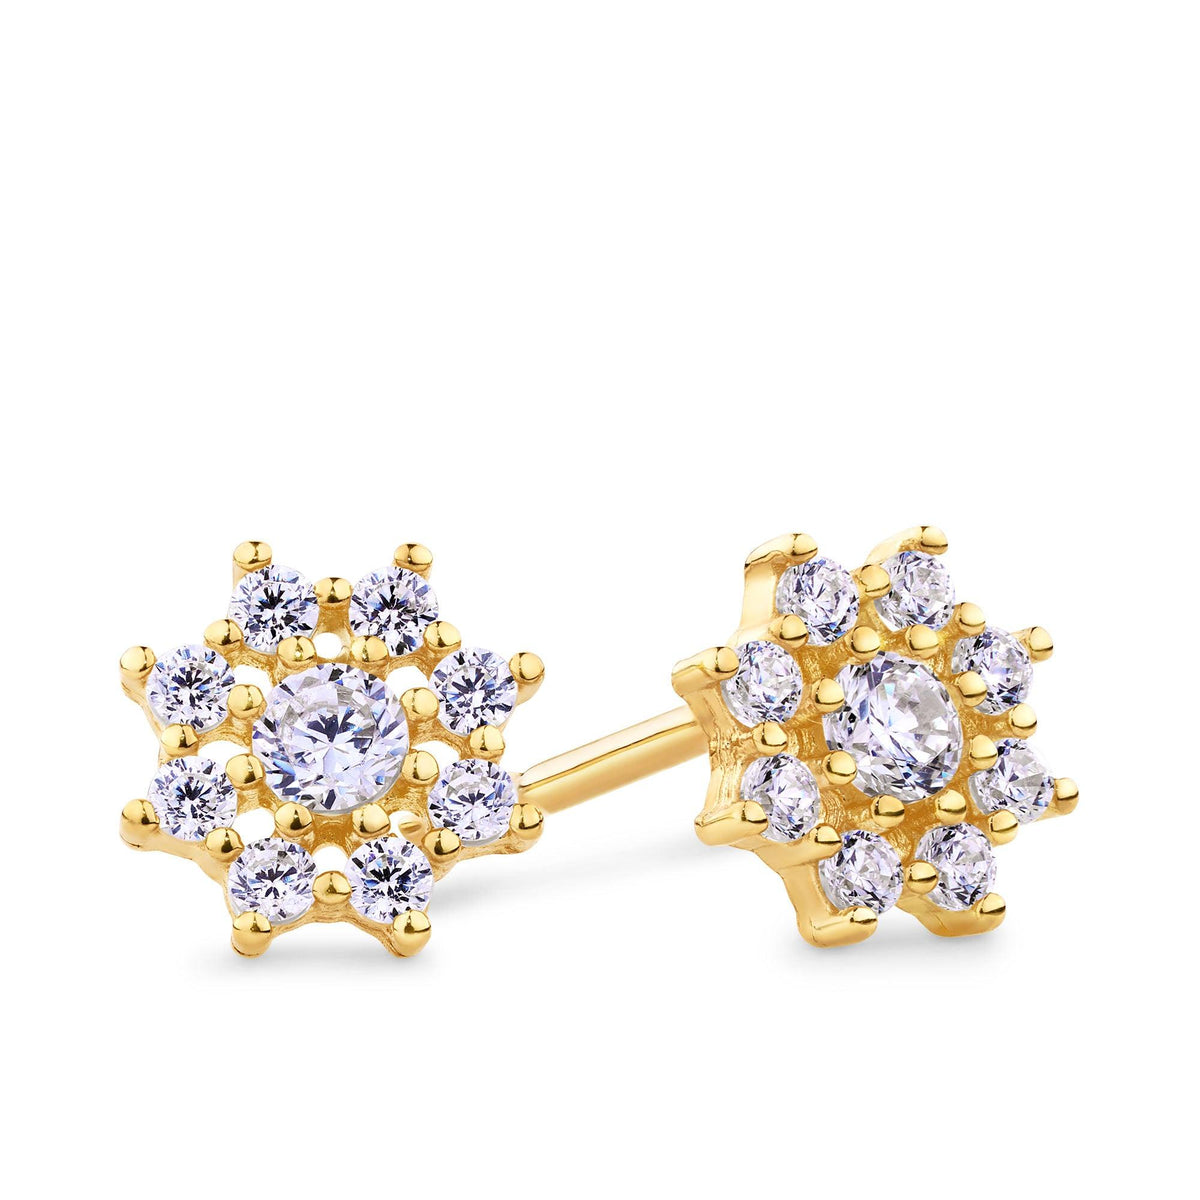 Petite Flower Cubic Zirconia Stud Earrings in 9ct Yellow Gold - Wallace Bishop